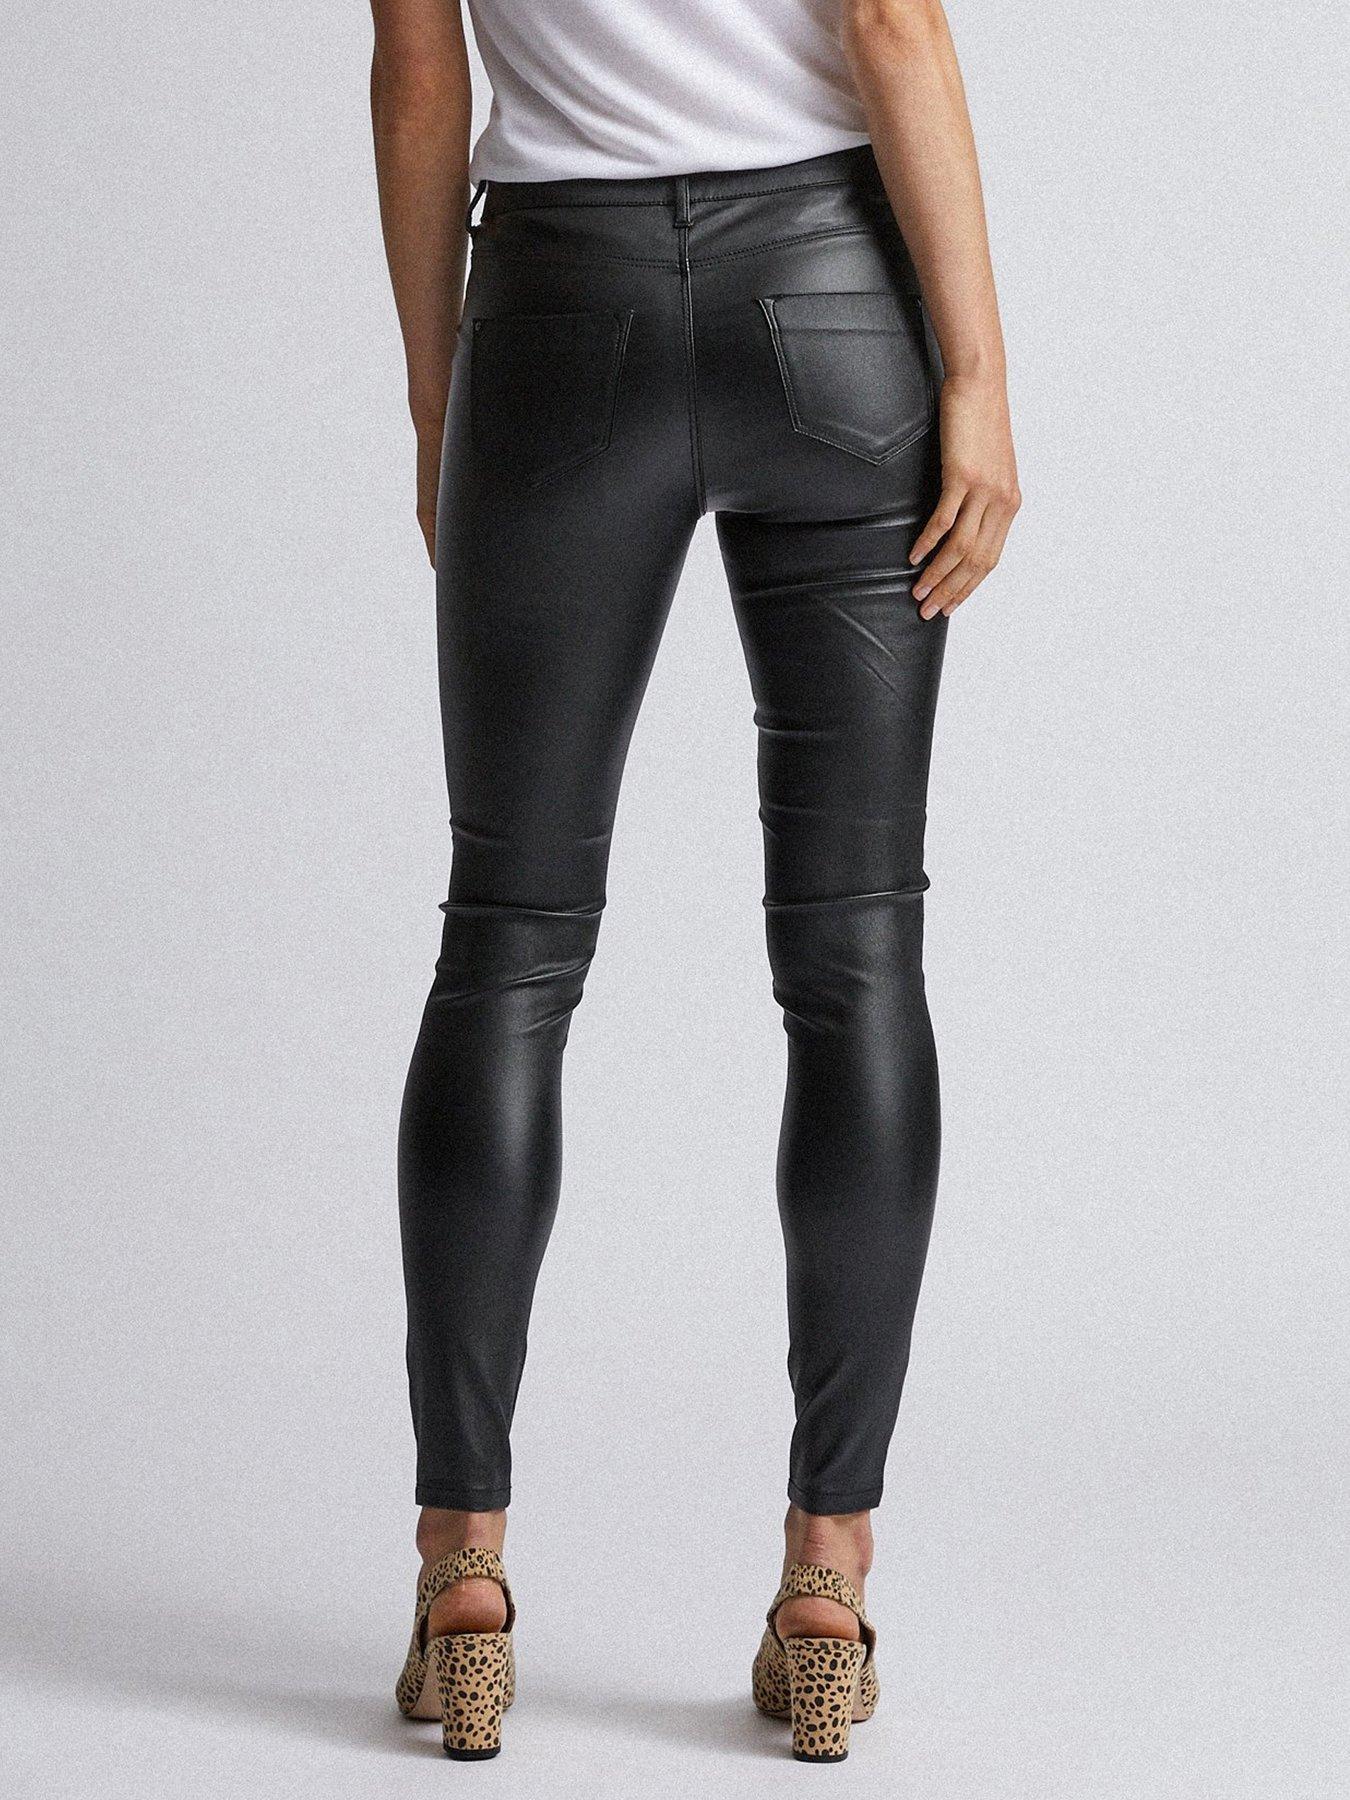 dorothy perkins leather jeans